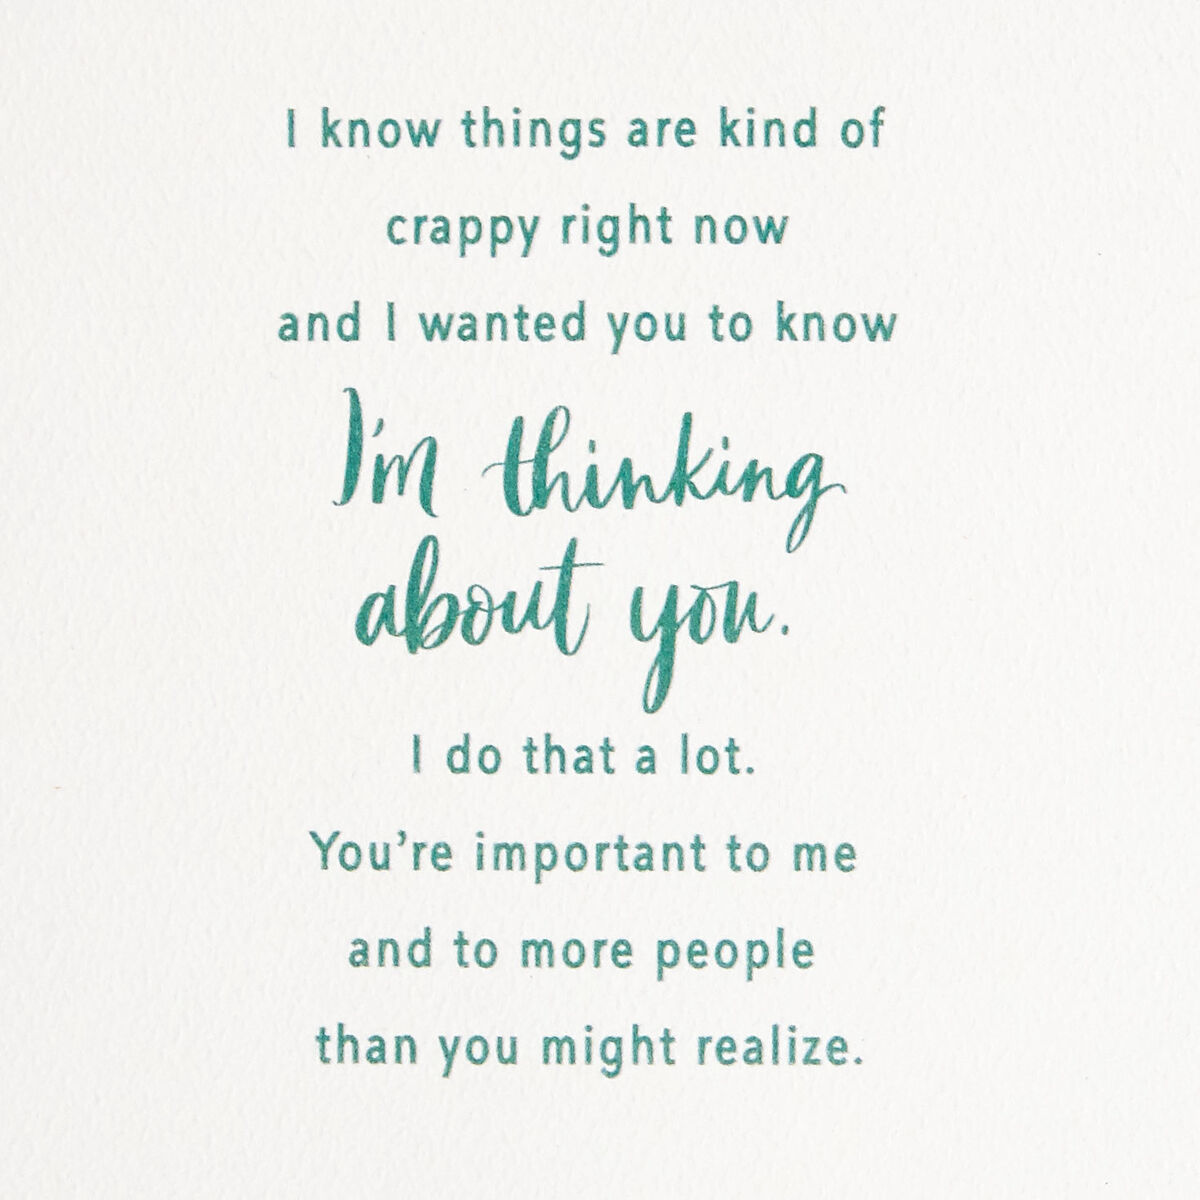 You're Important to Me Encouragement Card - Greeting Cards - Hallmark